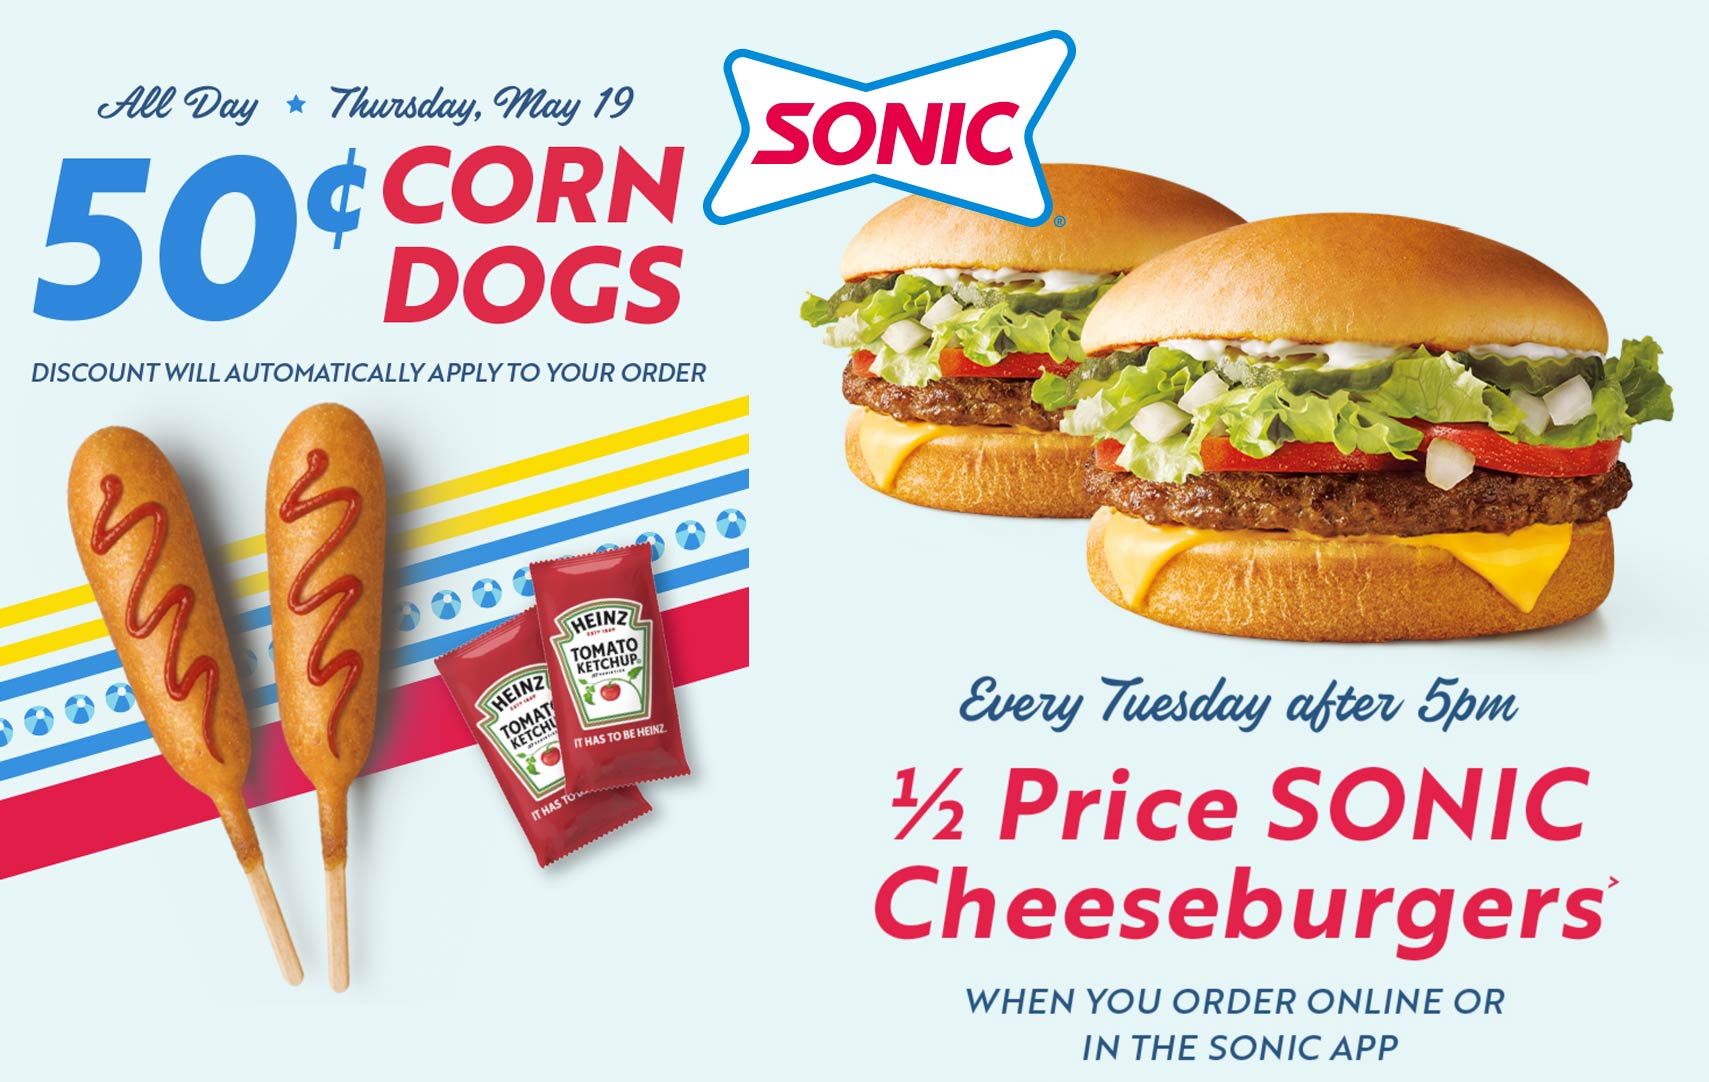 Sonic Drive-In restaurants Coupon  .50 cent corn dogs Thursday at Sonic Drive-In restaurants #sonicdrivein 